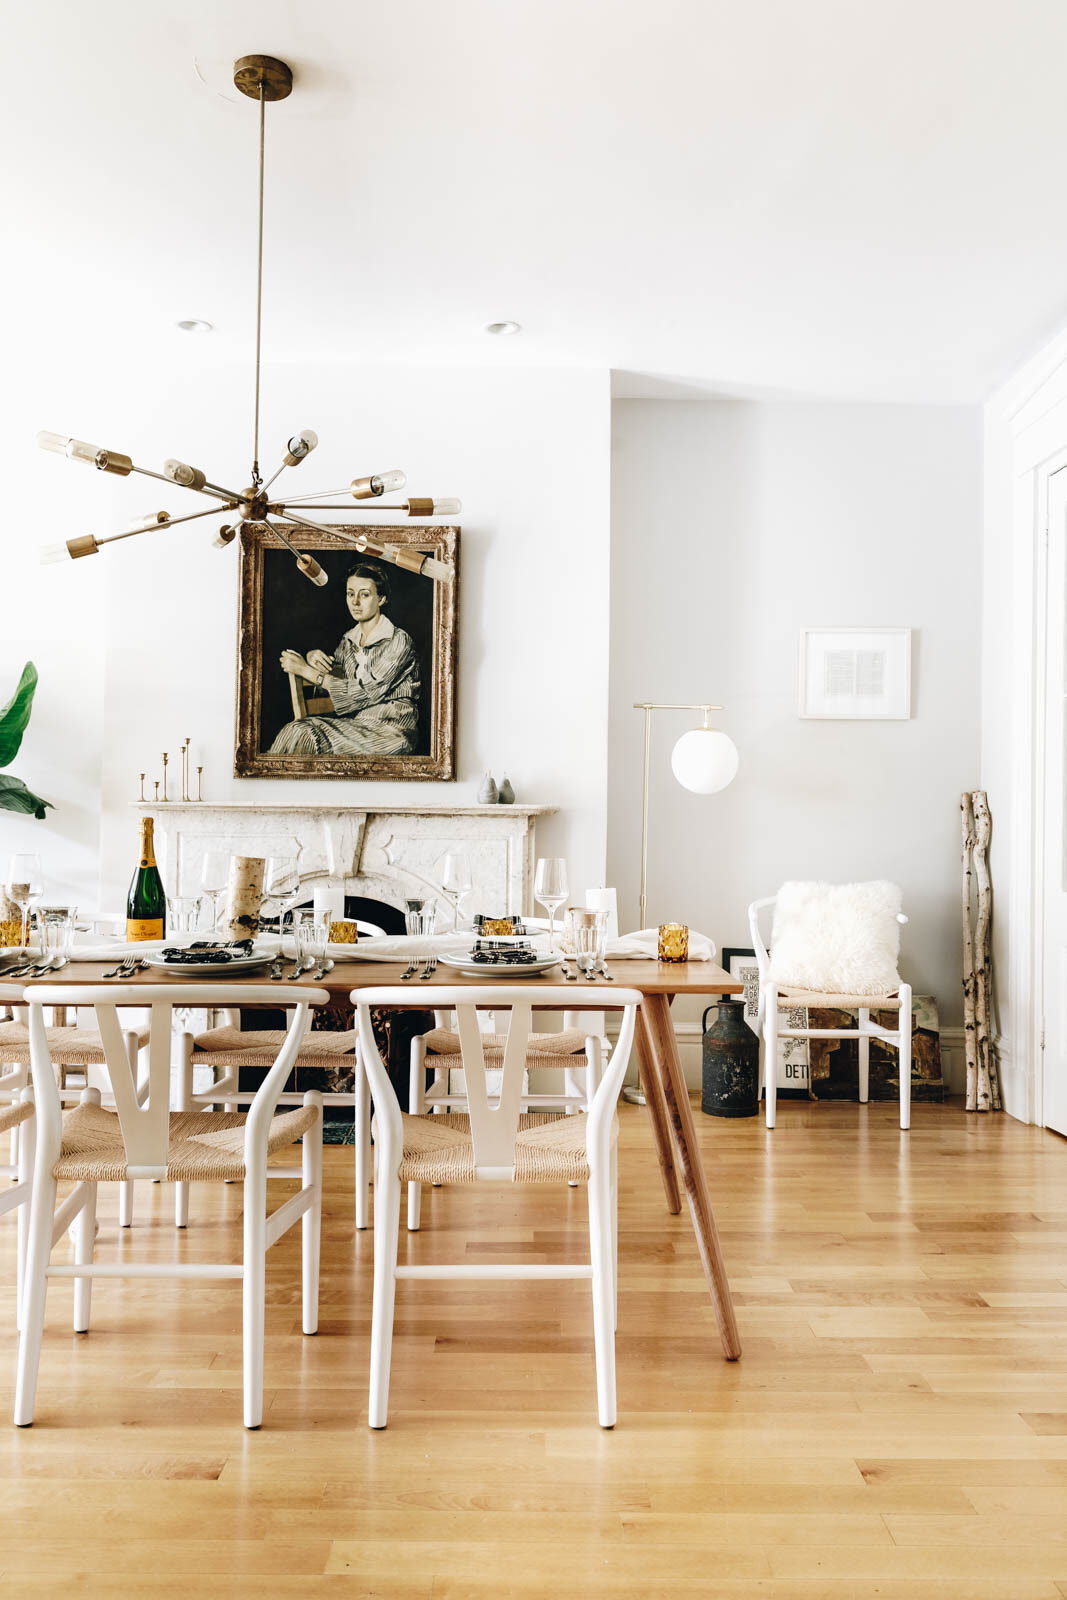 At a loss for how to design your dream dining room? I was too. Here's how I put together our dream dining room with stylish, but affordable pieces.